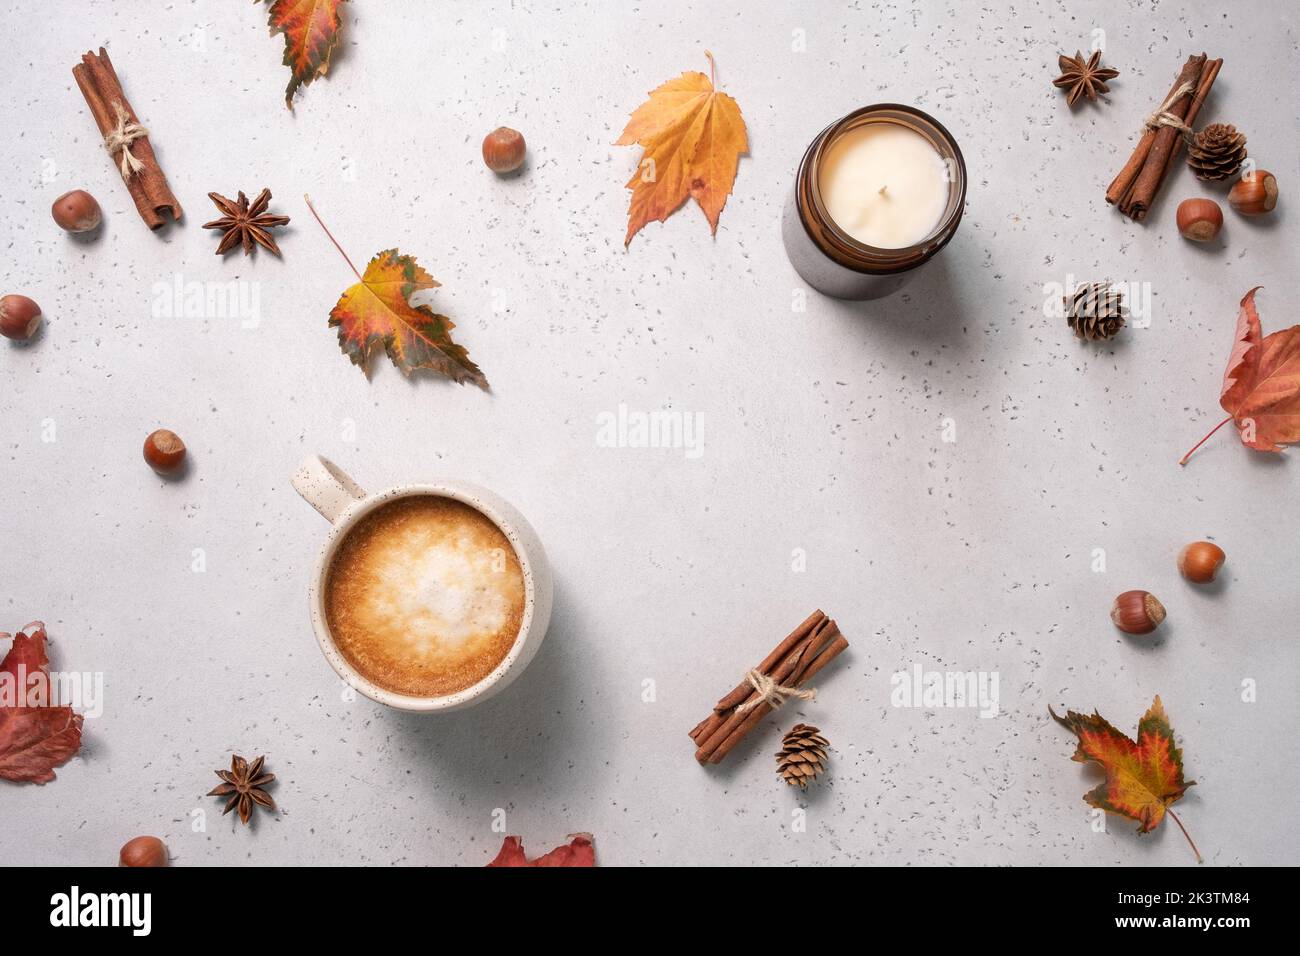 Autumn composition. Cup of coffee, blanket, autumn leaves, cinnamon sticks on white background. Flat lay, top view. Stock Photo